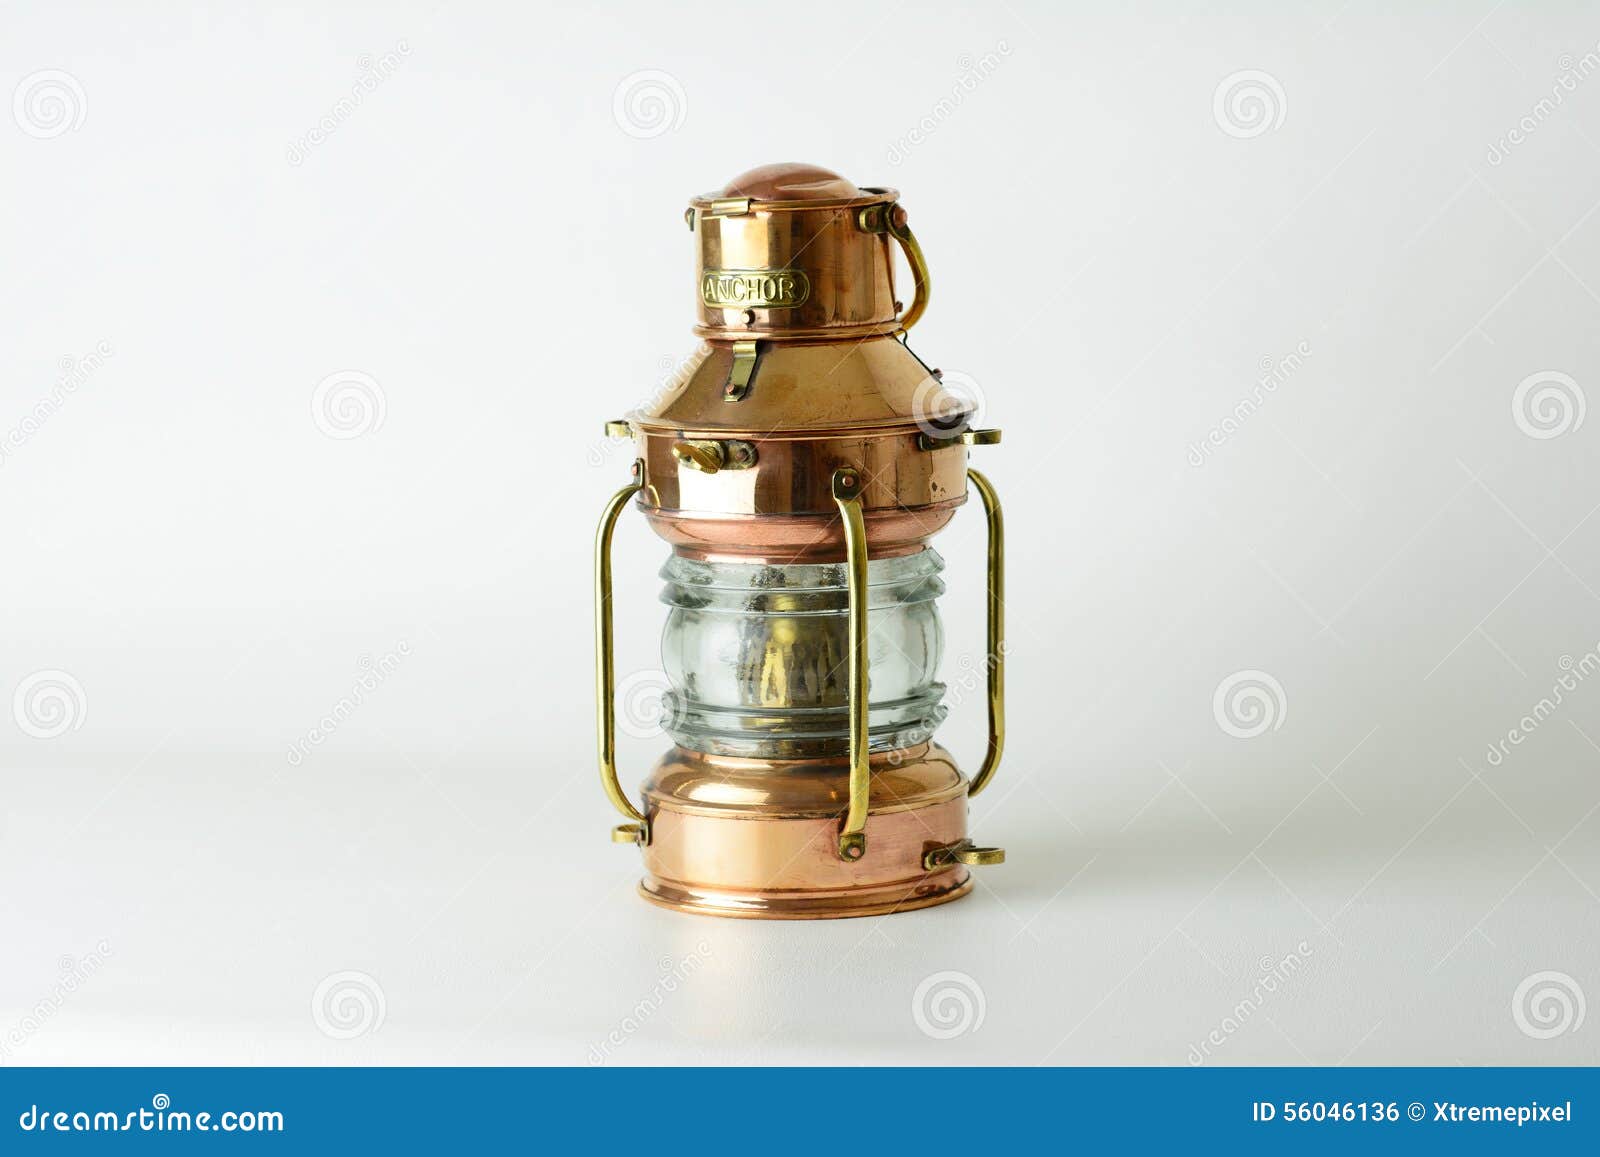 Copper and brass lantern stock photo. Image of shiny - 56046136